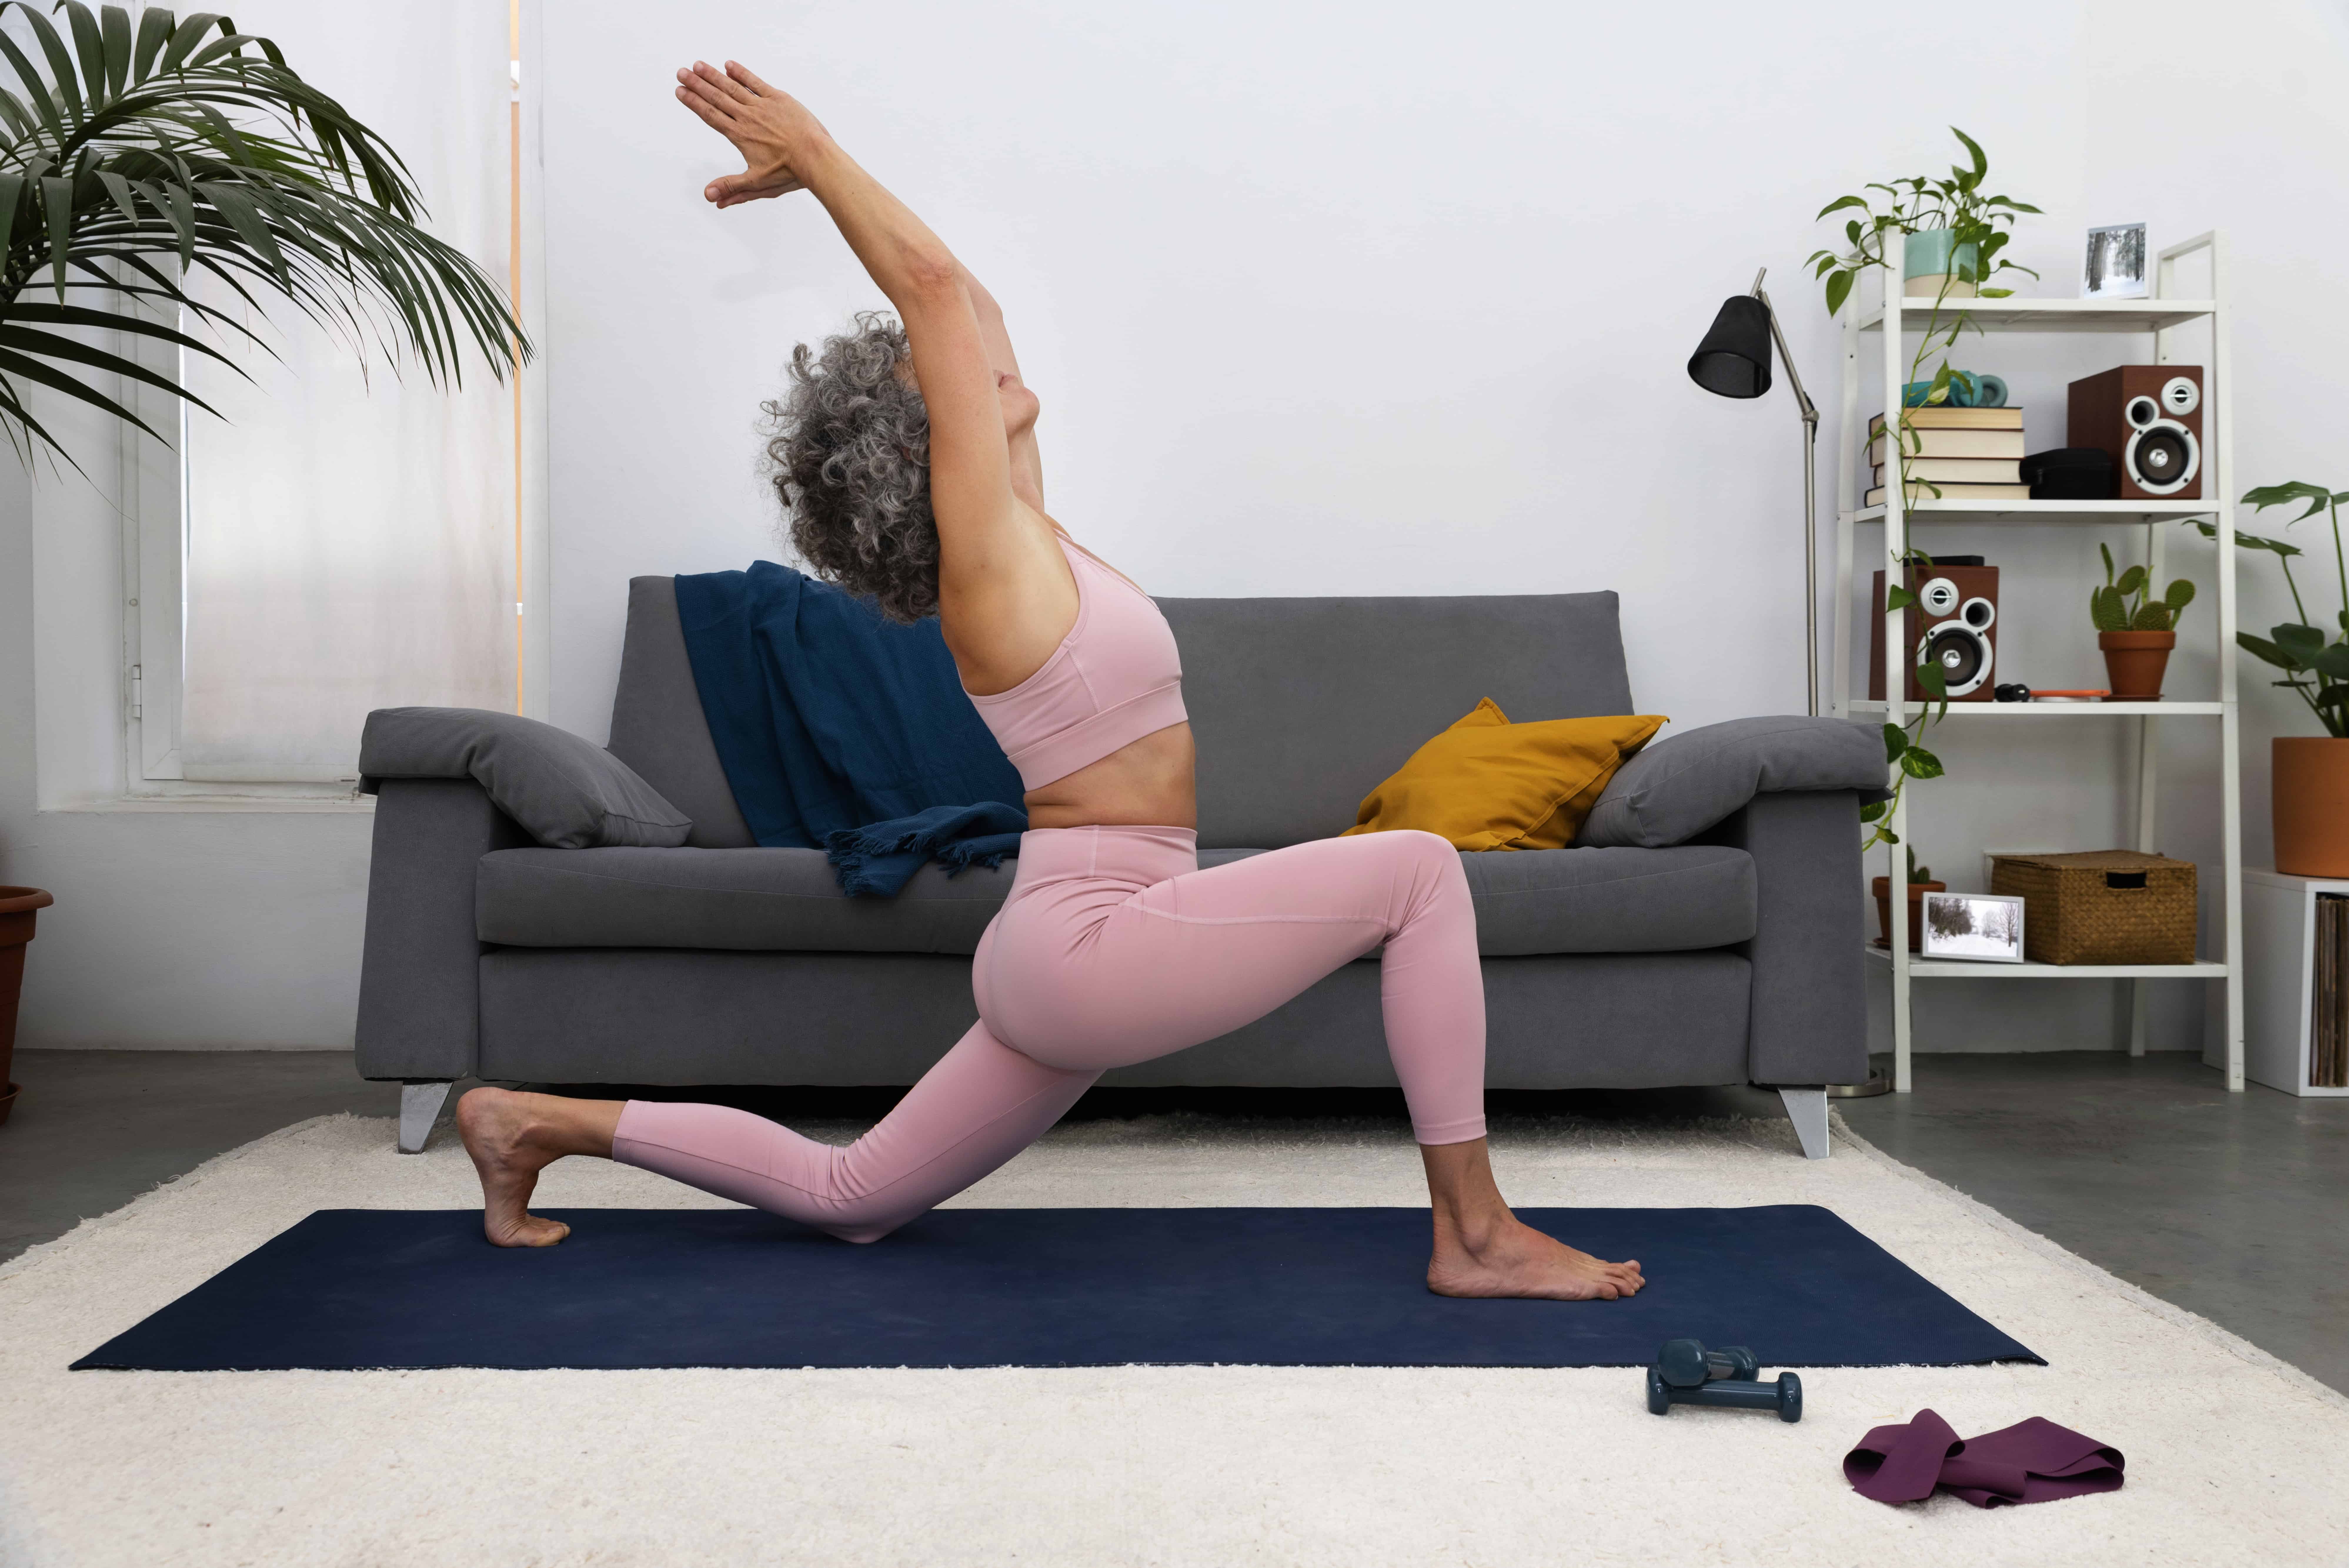 Elderly Woman Exercising At Home